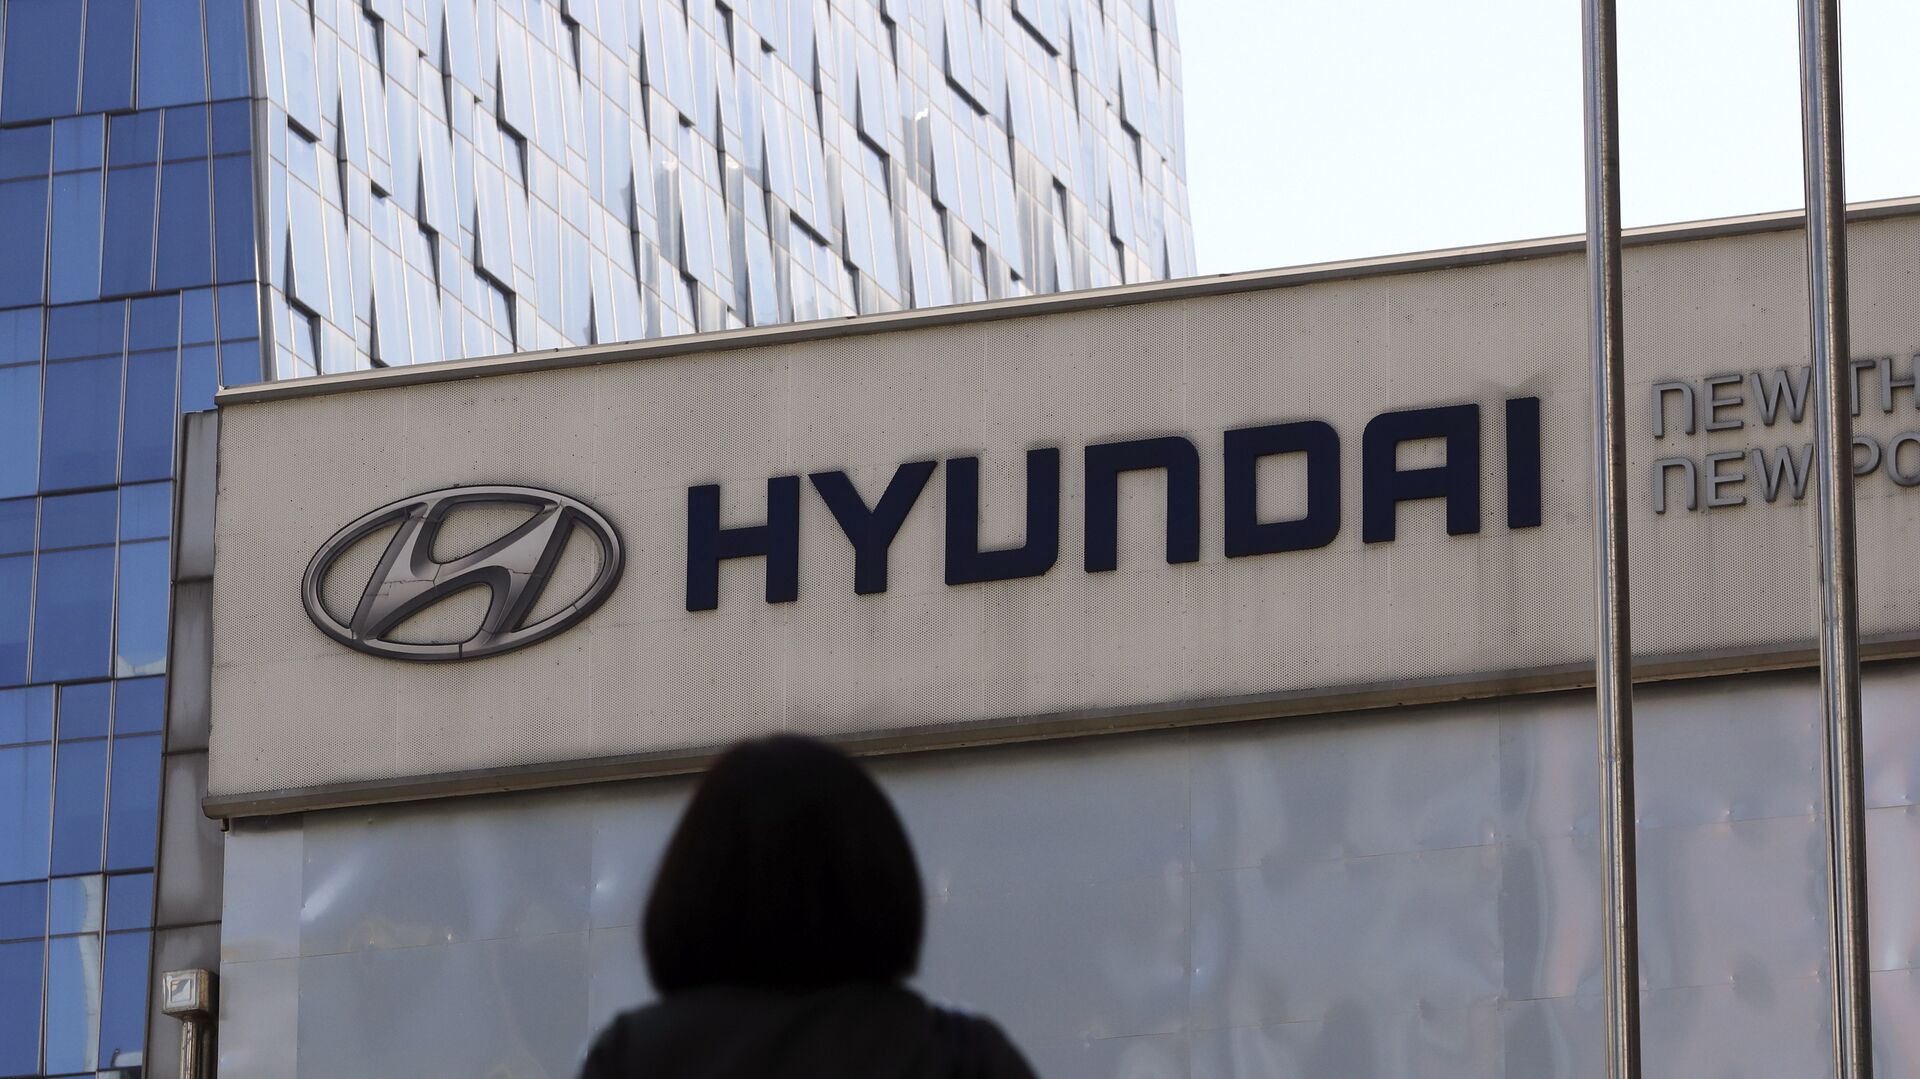 The logo of Hyundai Motor Co. is displayed at the automaker's showroom in Seoul, South Korea, Wednesday, April 26, 2017 - Sputnik International, 1920, 08.02.2022